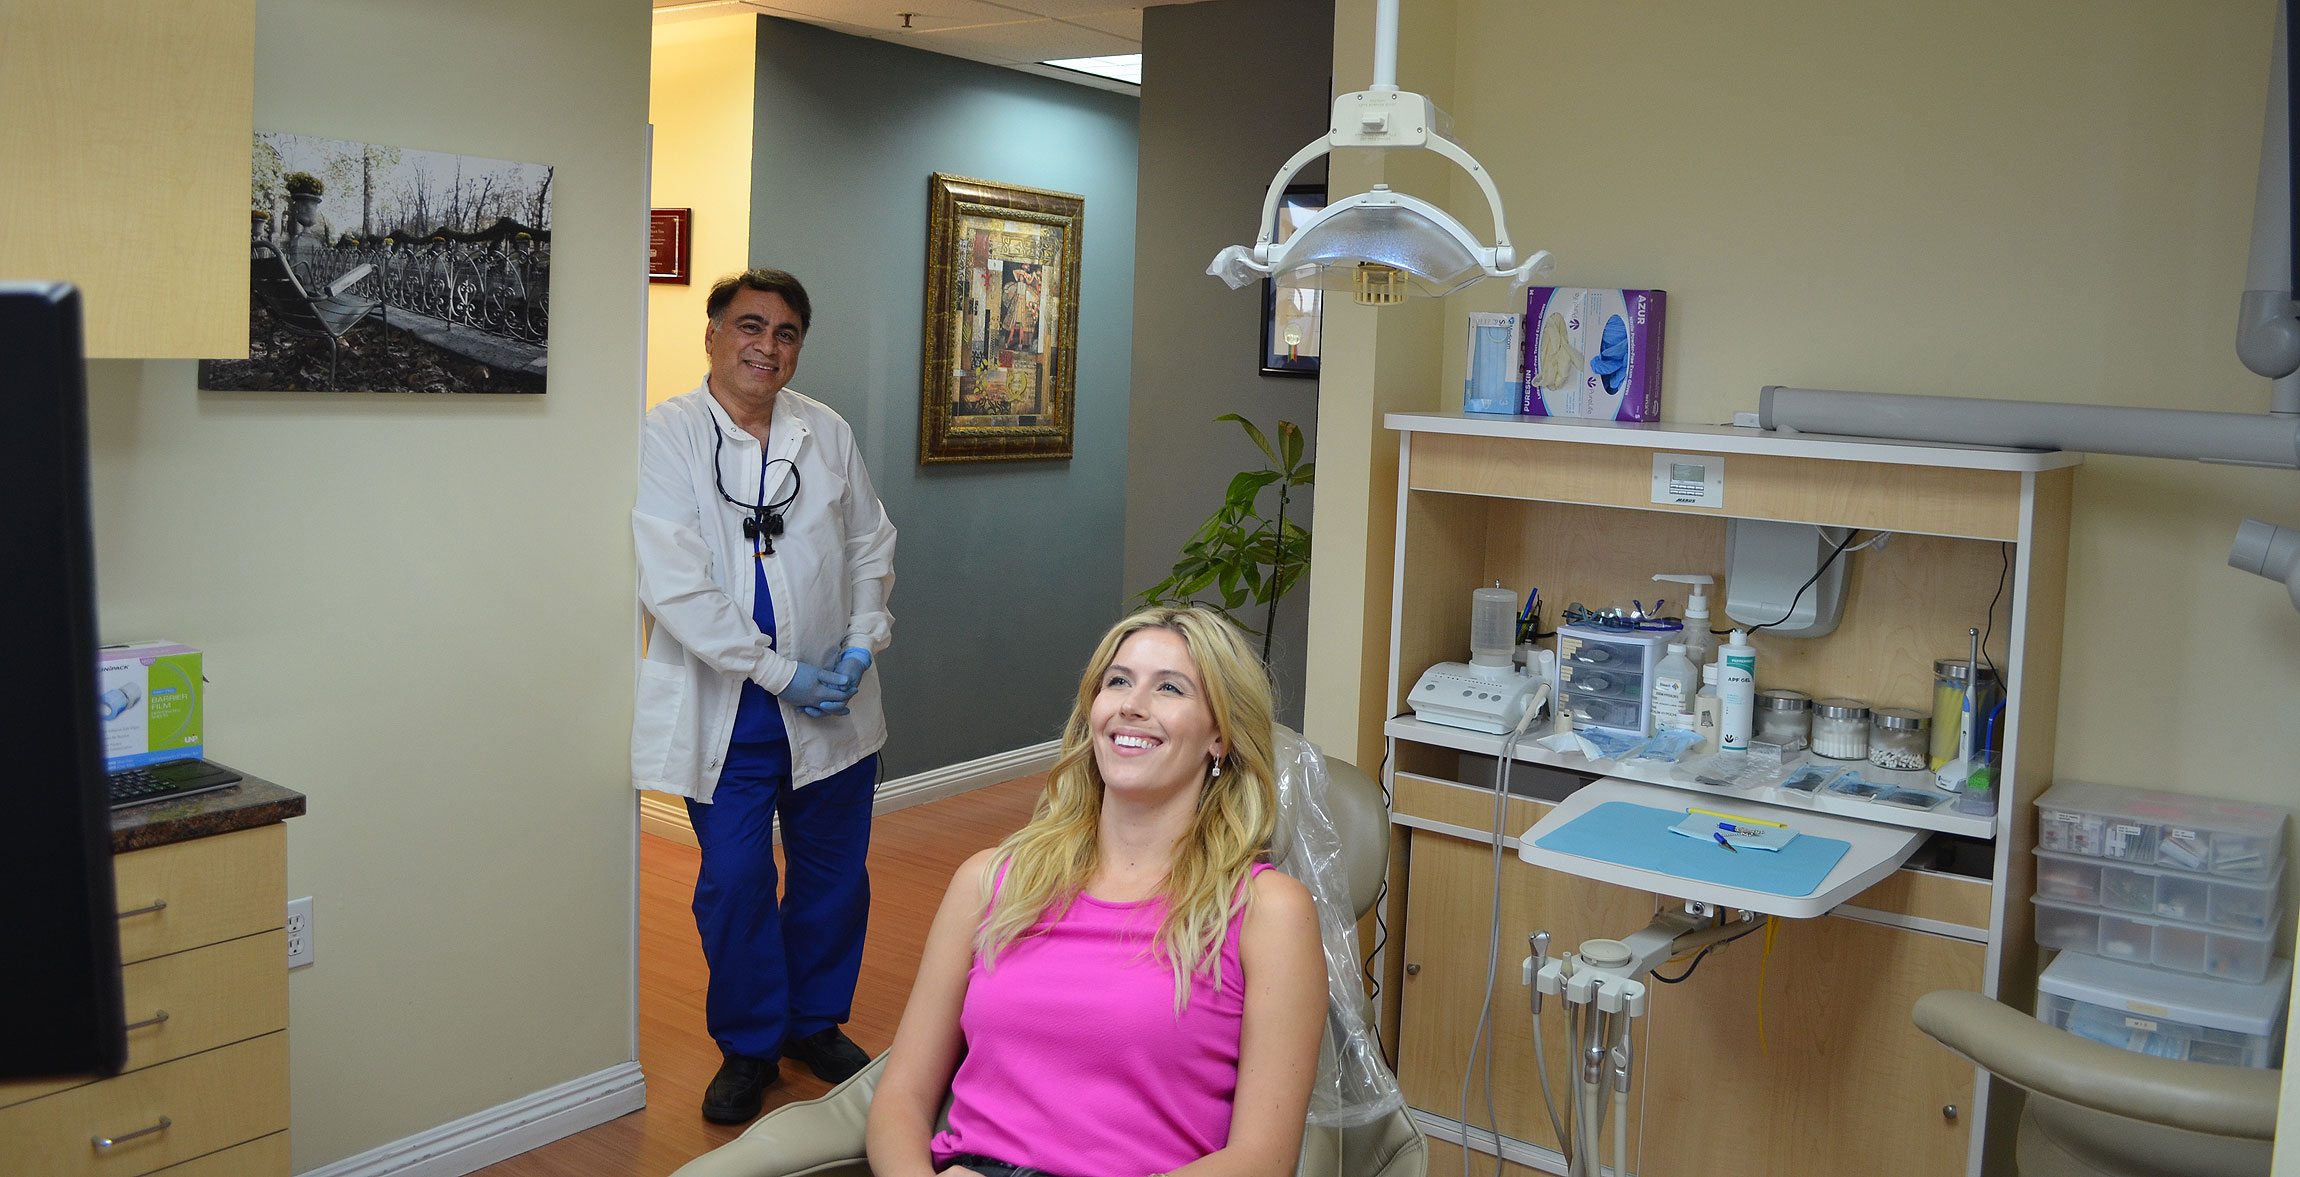 Do you have a Chipped or Cracked Tooth? Learn about the treatment options  and repair. - Smile Angels of Beverly Hills